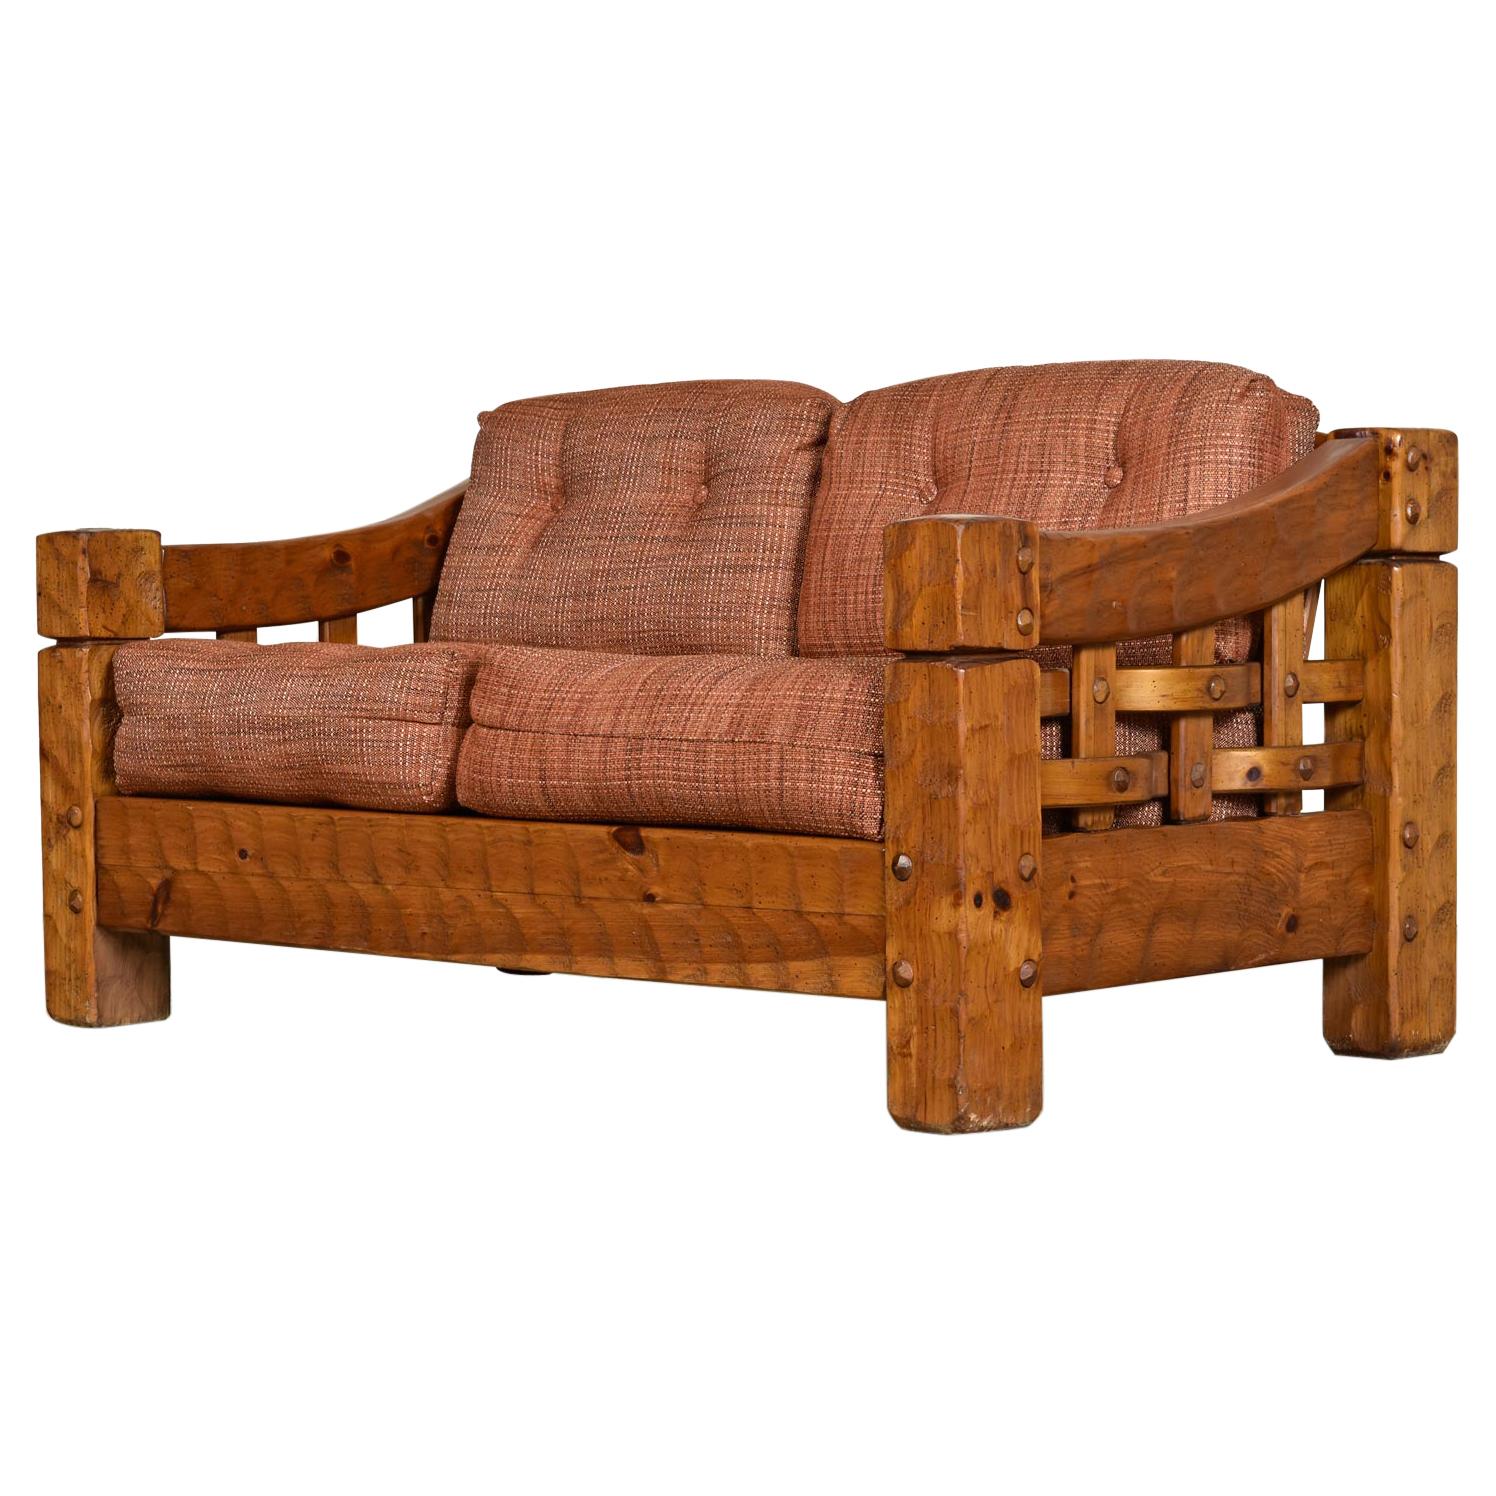 Rustic Modern Solid Knotty Pine Lodge Style Loveseat Sofa by Null